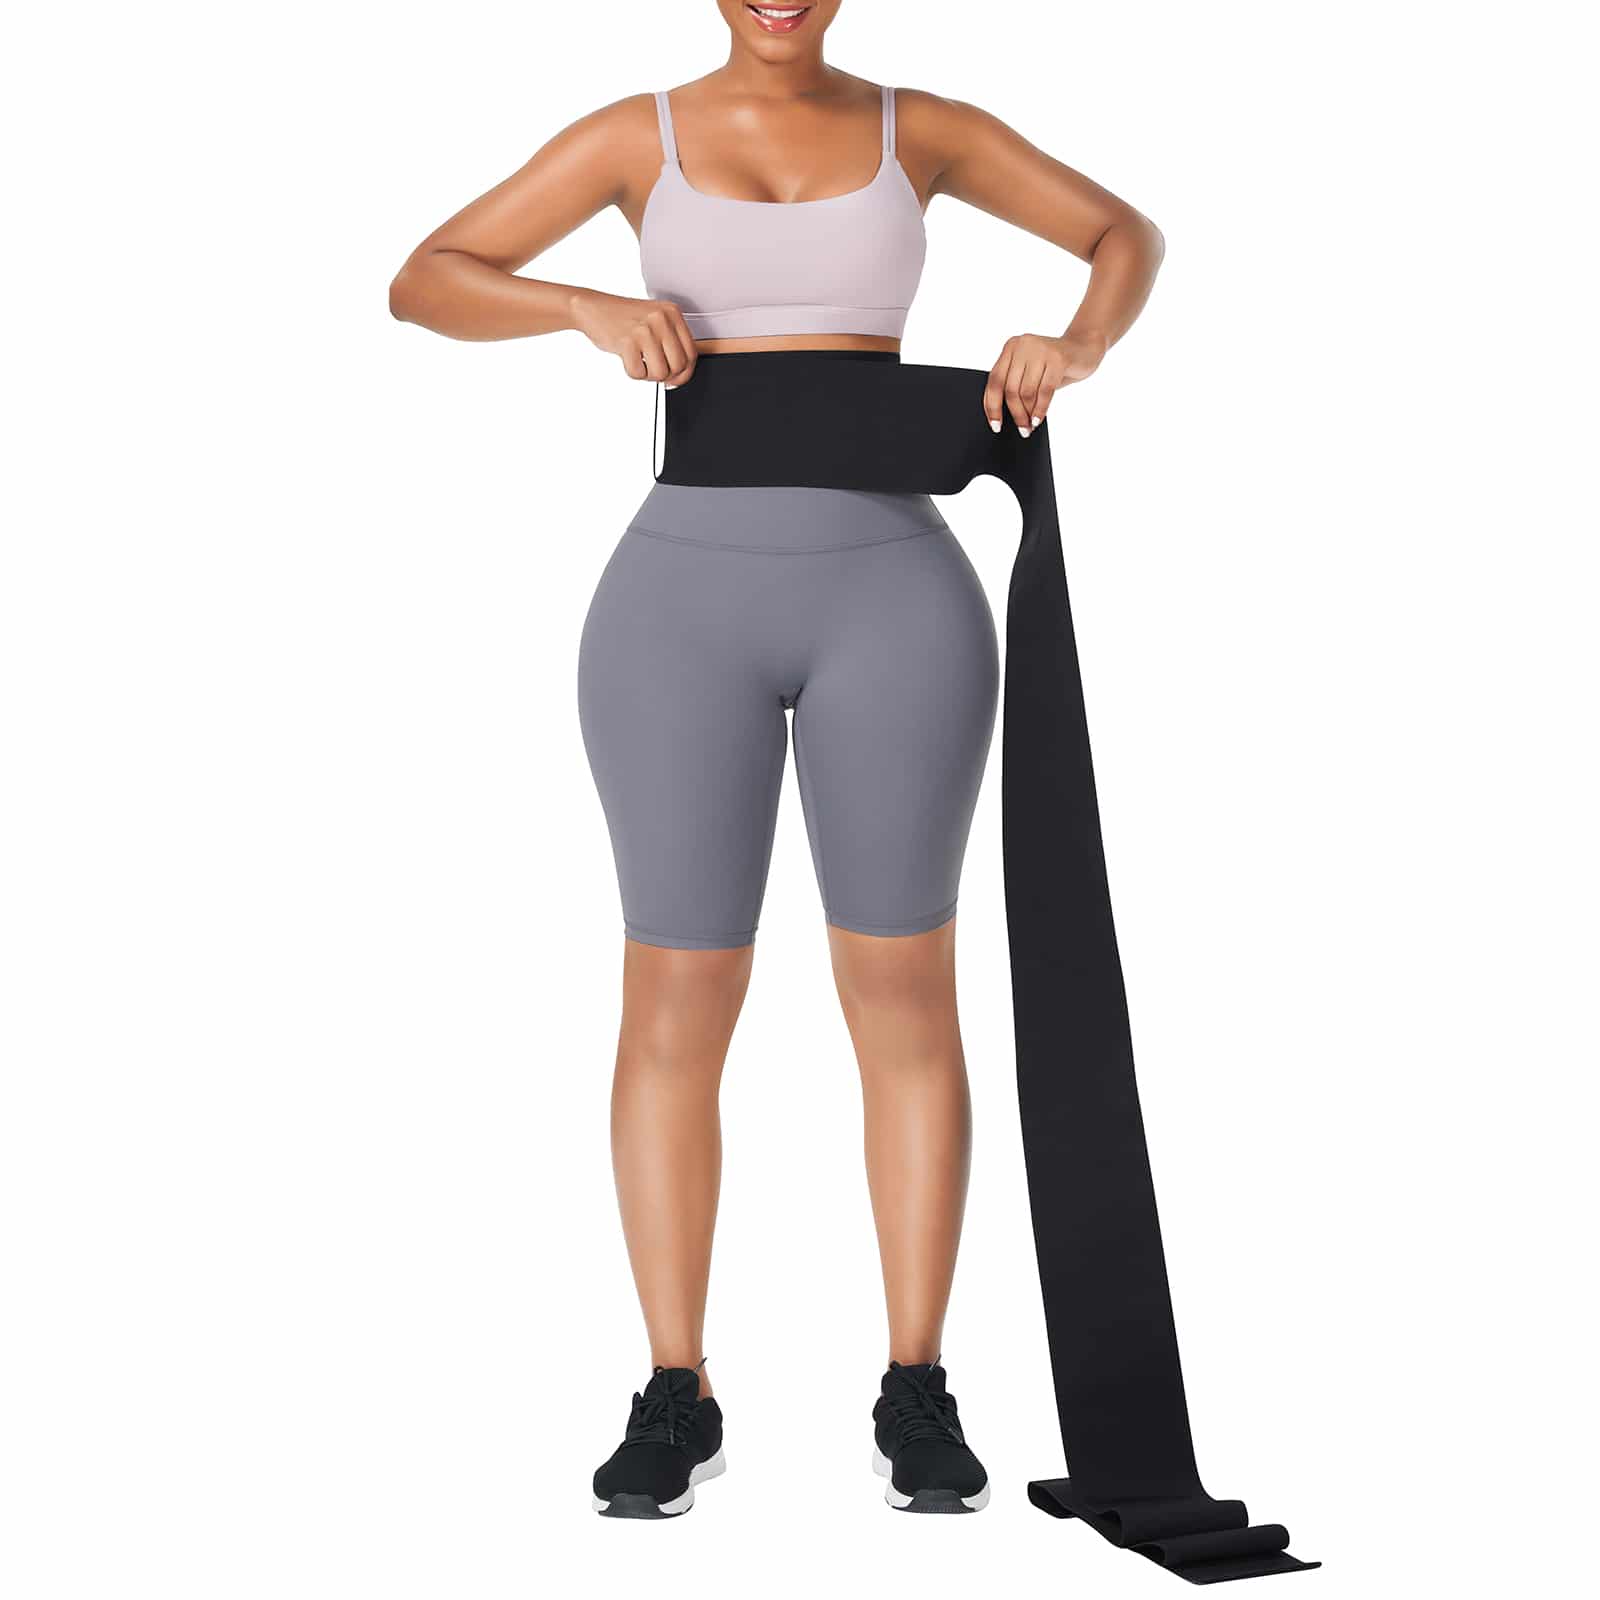 Waist Trainer Wrap Band  Fast Delivery - Waist Trainers Australia